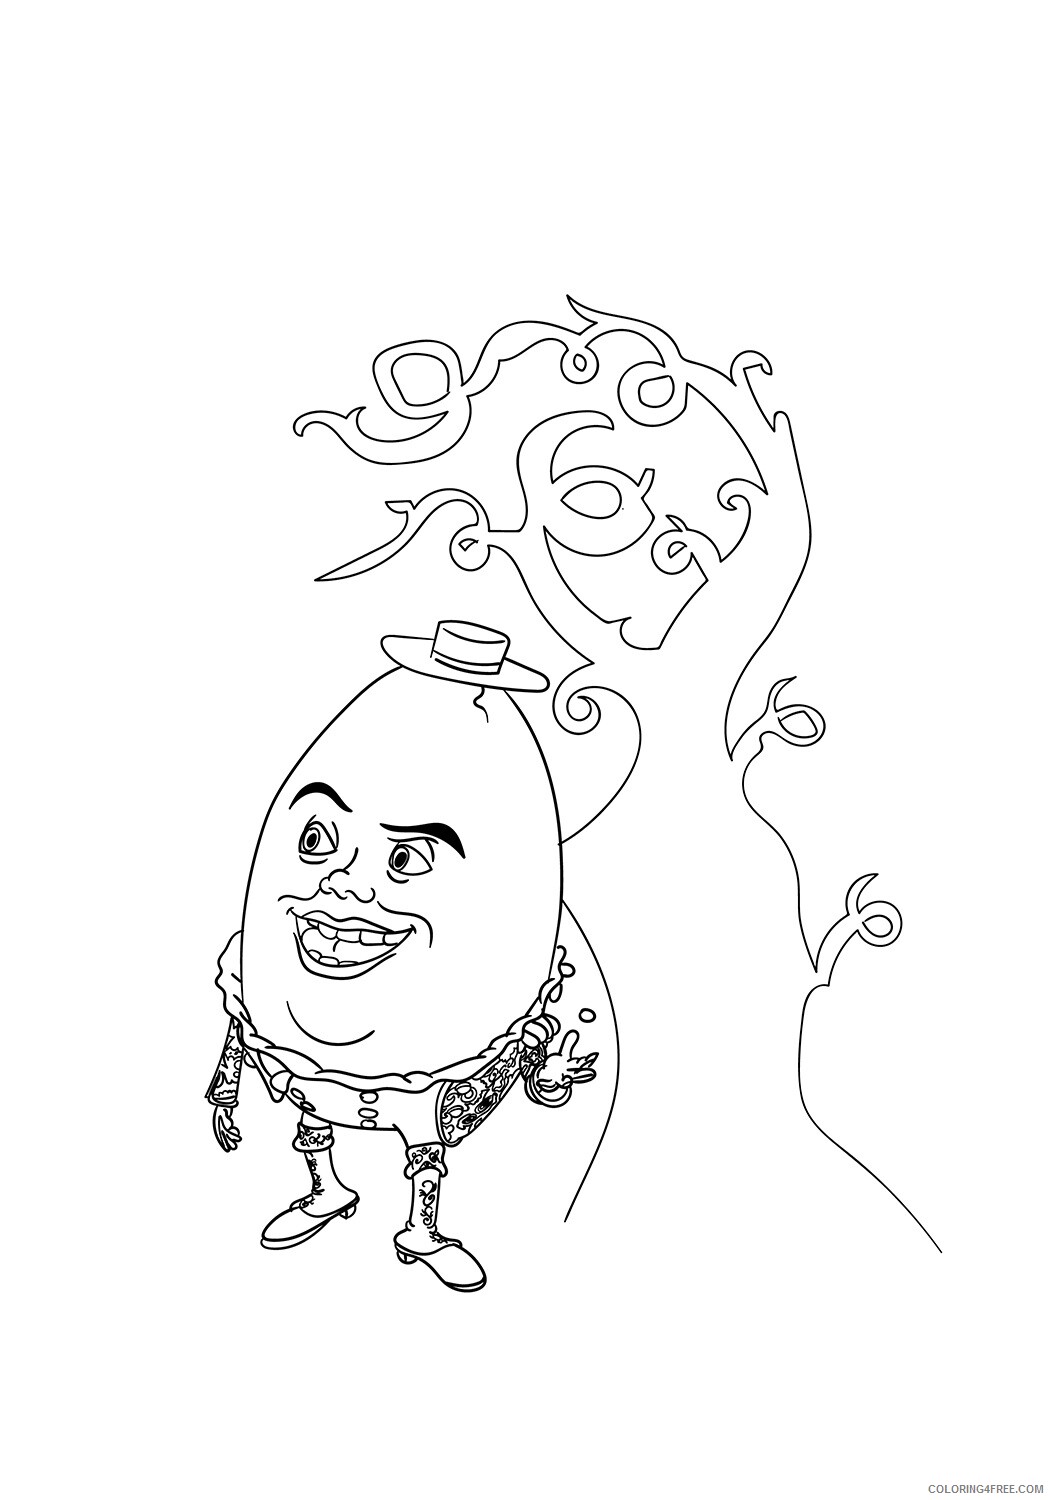 Humpty Dumpty Coloring Pages humpty alexander dumpty Printable 2021 3460 Coloring4free